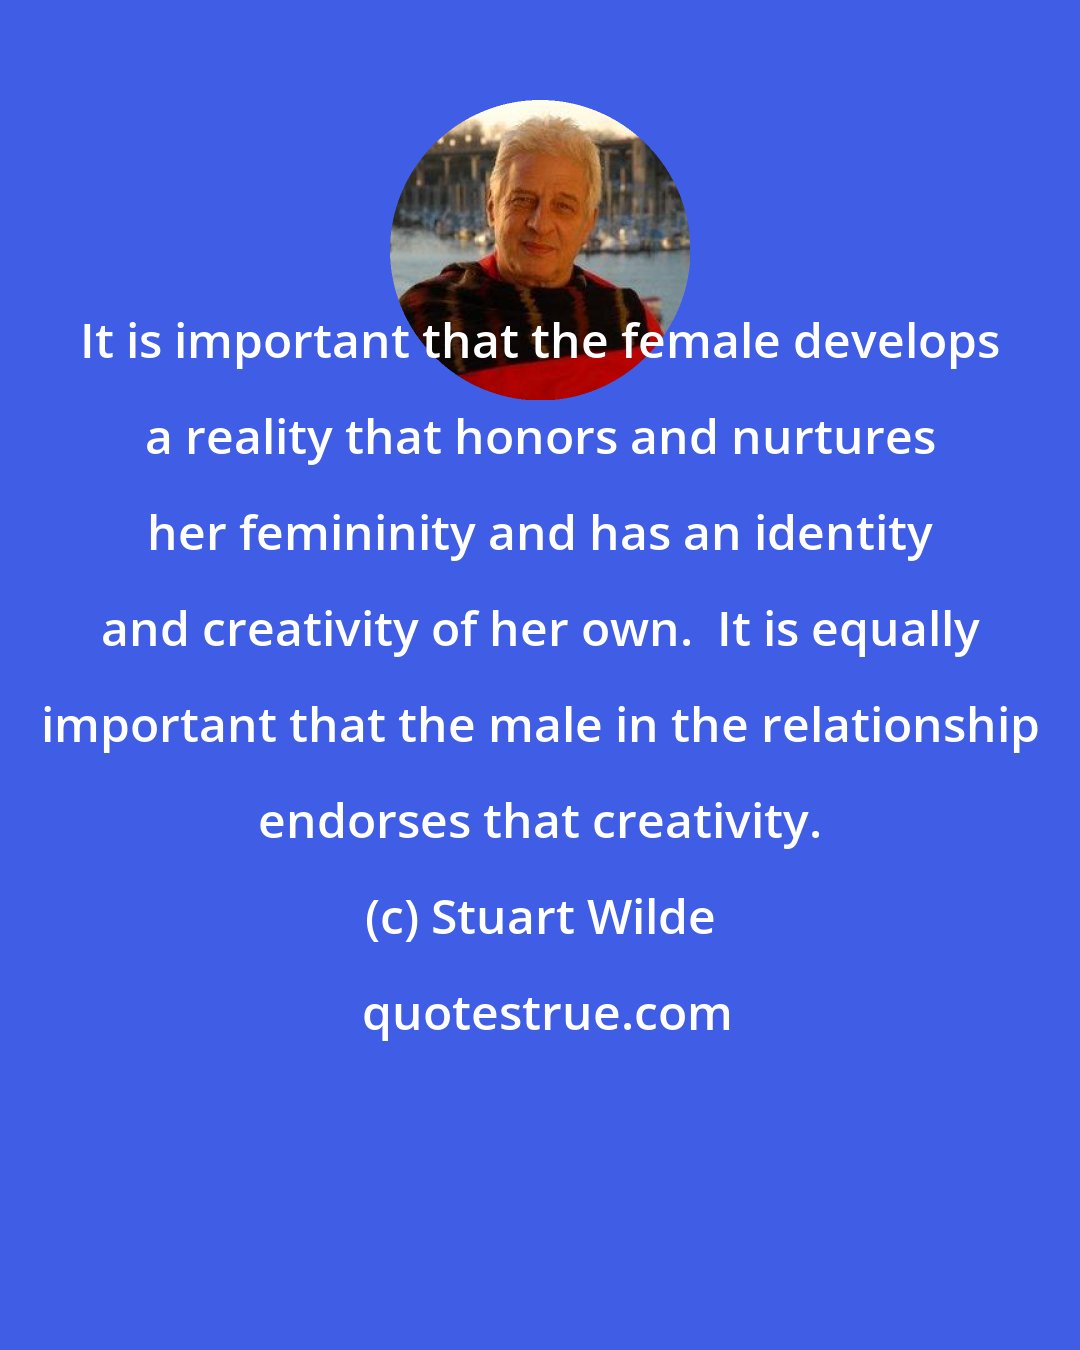 Stuart Wilde: It is important that the female develops a reality that honors and nurtures her femininity and has an identity and creativity of her own.  It is equally important that the male in the relationship endorses that creativity.